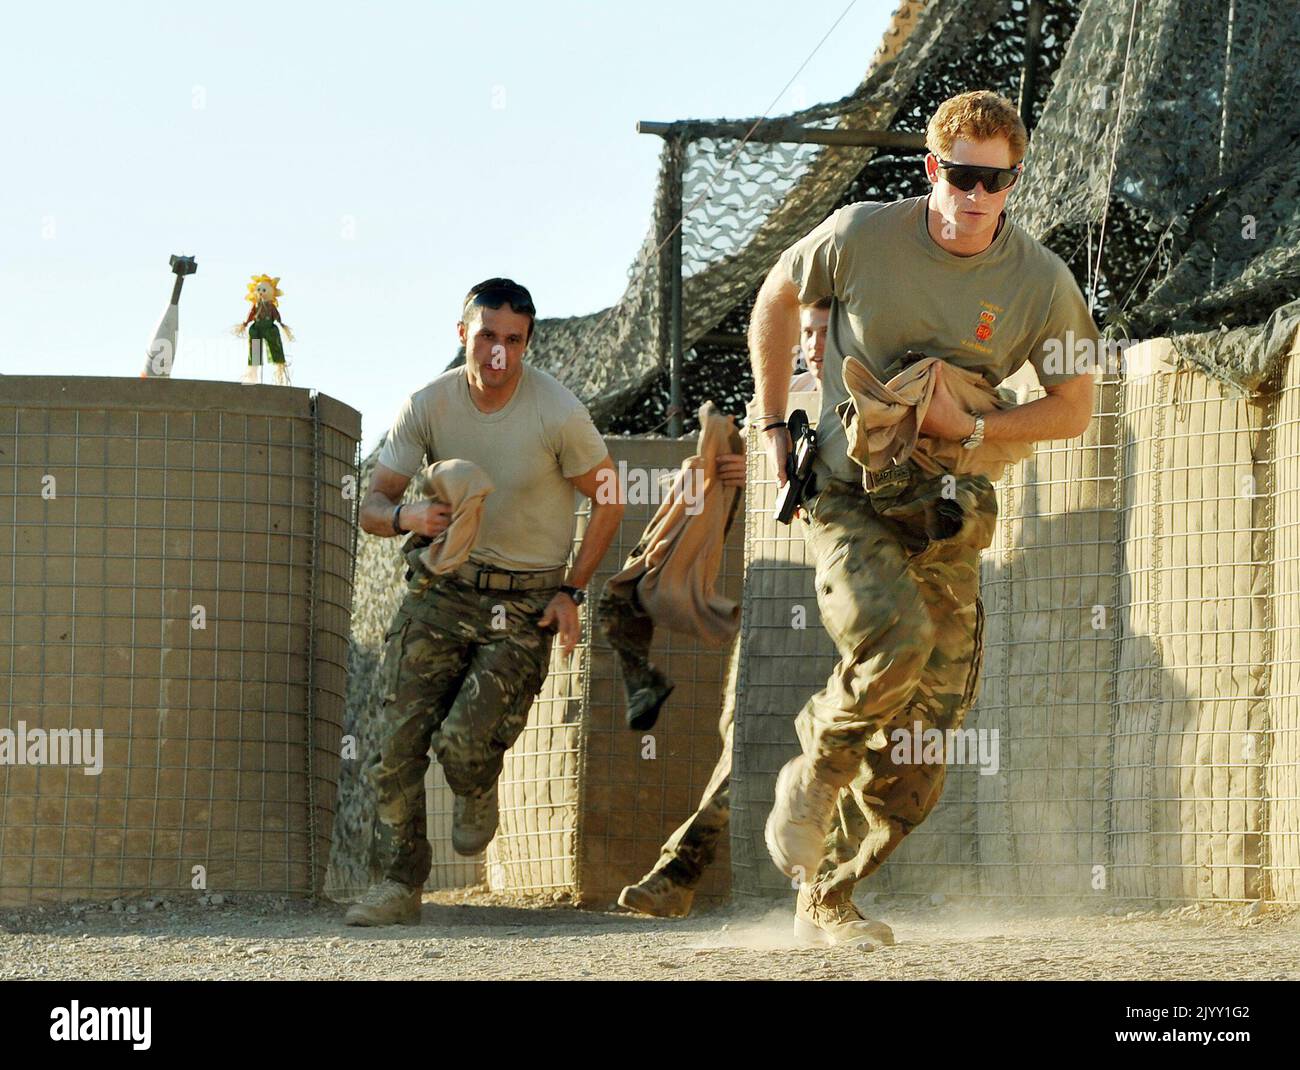 File photo dated 03/11/2012 of Prince Harry (right) or just plain Captain Wales as he was known in the British Army, racing out from the VHR (very high readiness) tent to scramble his Apache with fellow Pilots, during his 12 hour shift at the British controlled flight-line in Camp Bastion southern Afghanistan, where he was serving as an Apache Helicopter Pilot/Gunner with 662 Sqd Army Air Corps, from September 2012 for four months until January 2013. The former soldier said the time he spent in the Army, when he was 'just Harry', was 'the best escape I've ever had' and he had considered giving Stock Photo